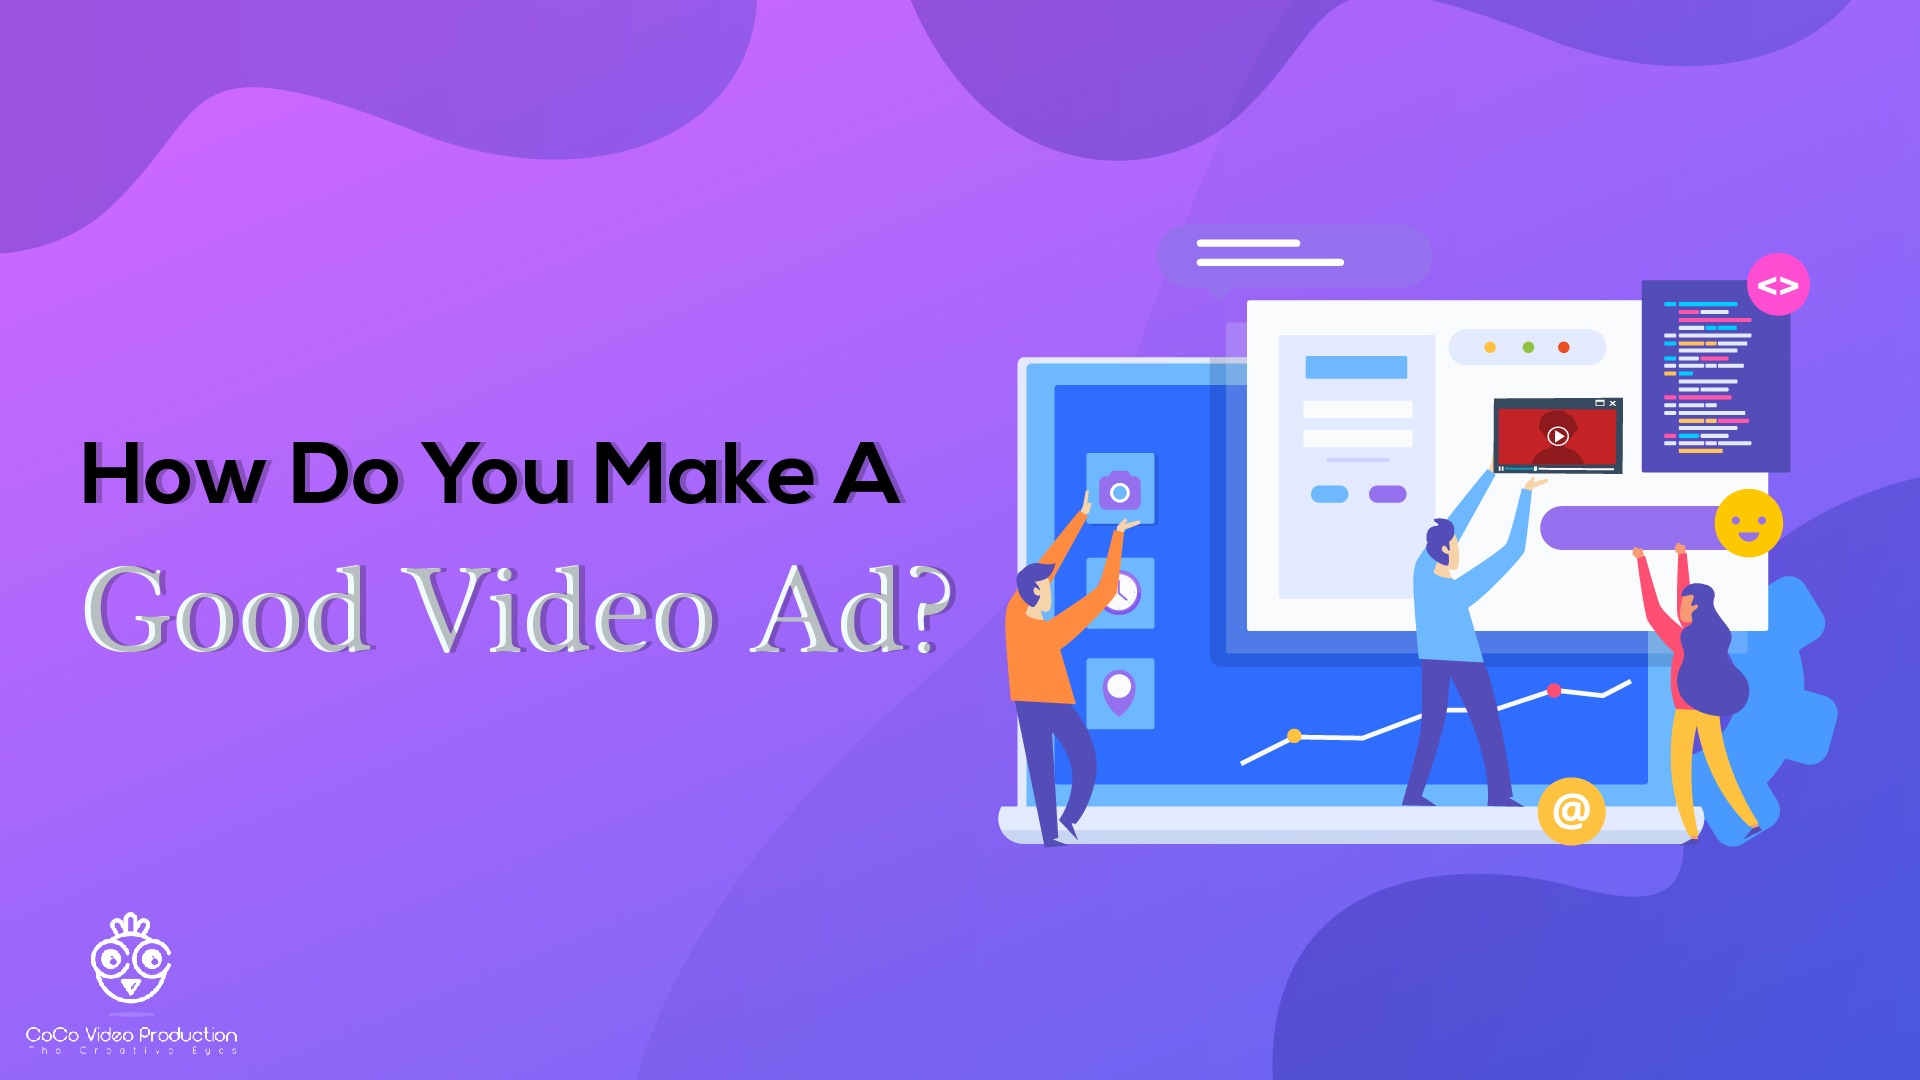 Read more about the article <a href="http://cocovideoproduction.com/how-do-you-make-a-good-video-ad/">How Do You Make A Good Video Ad?</a>